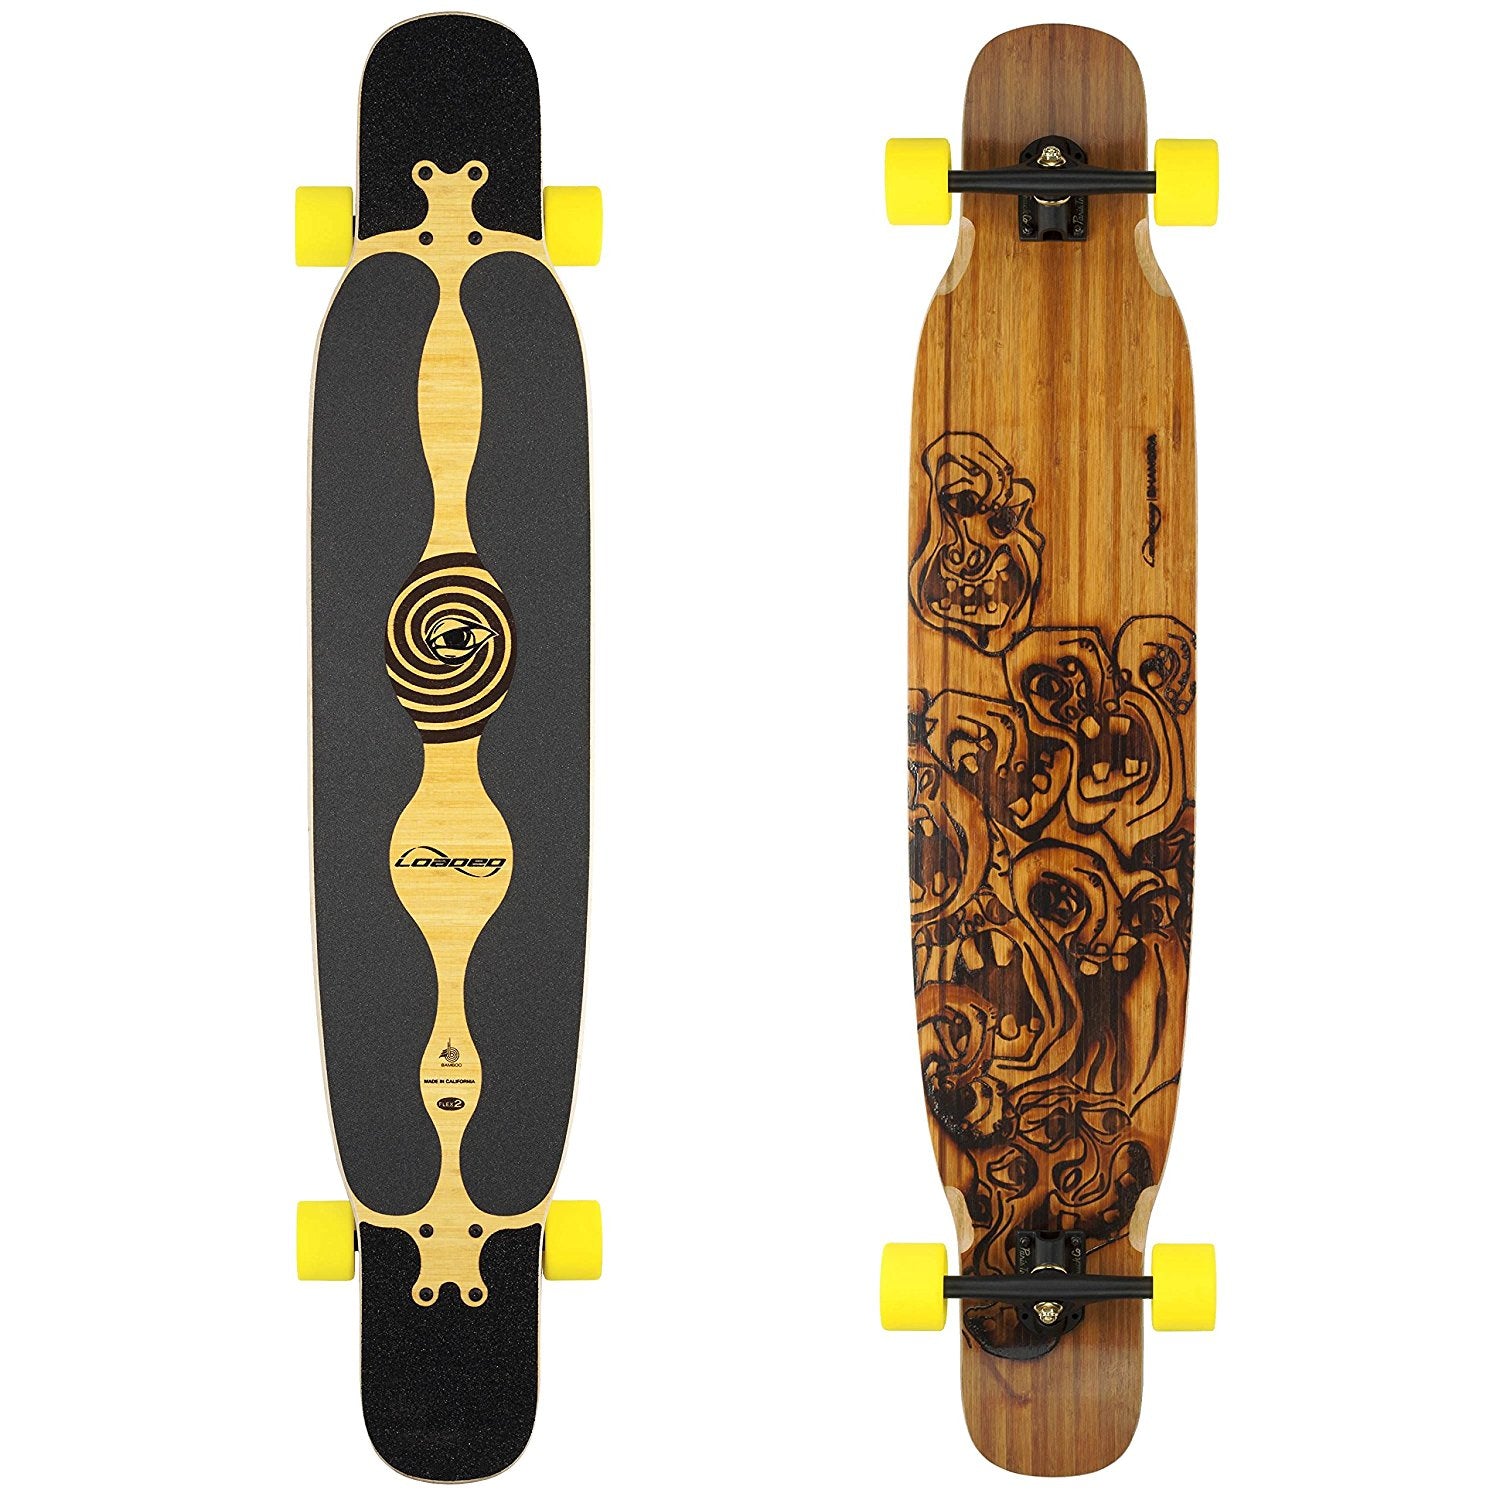 Loaded Bhangra Dancer Longboard, Deck and Complete